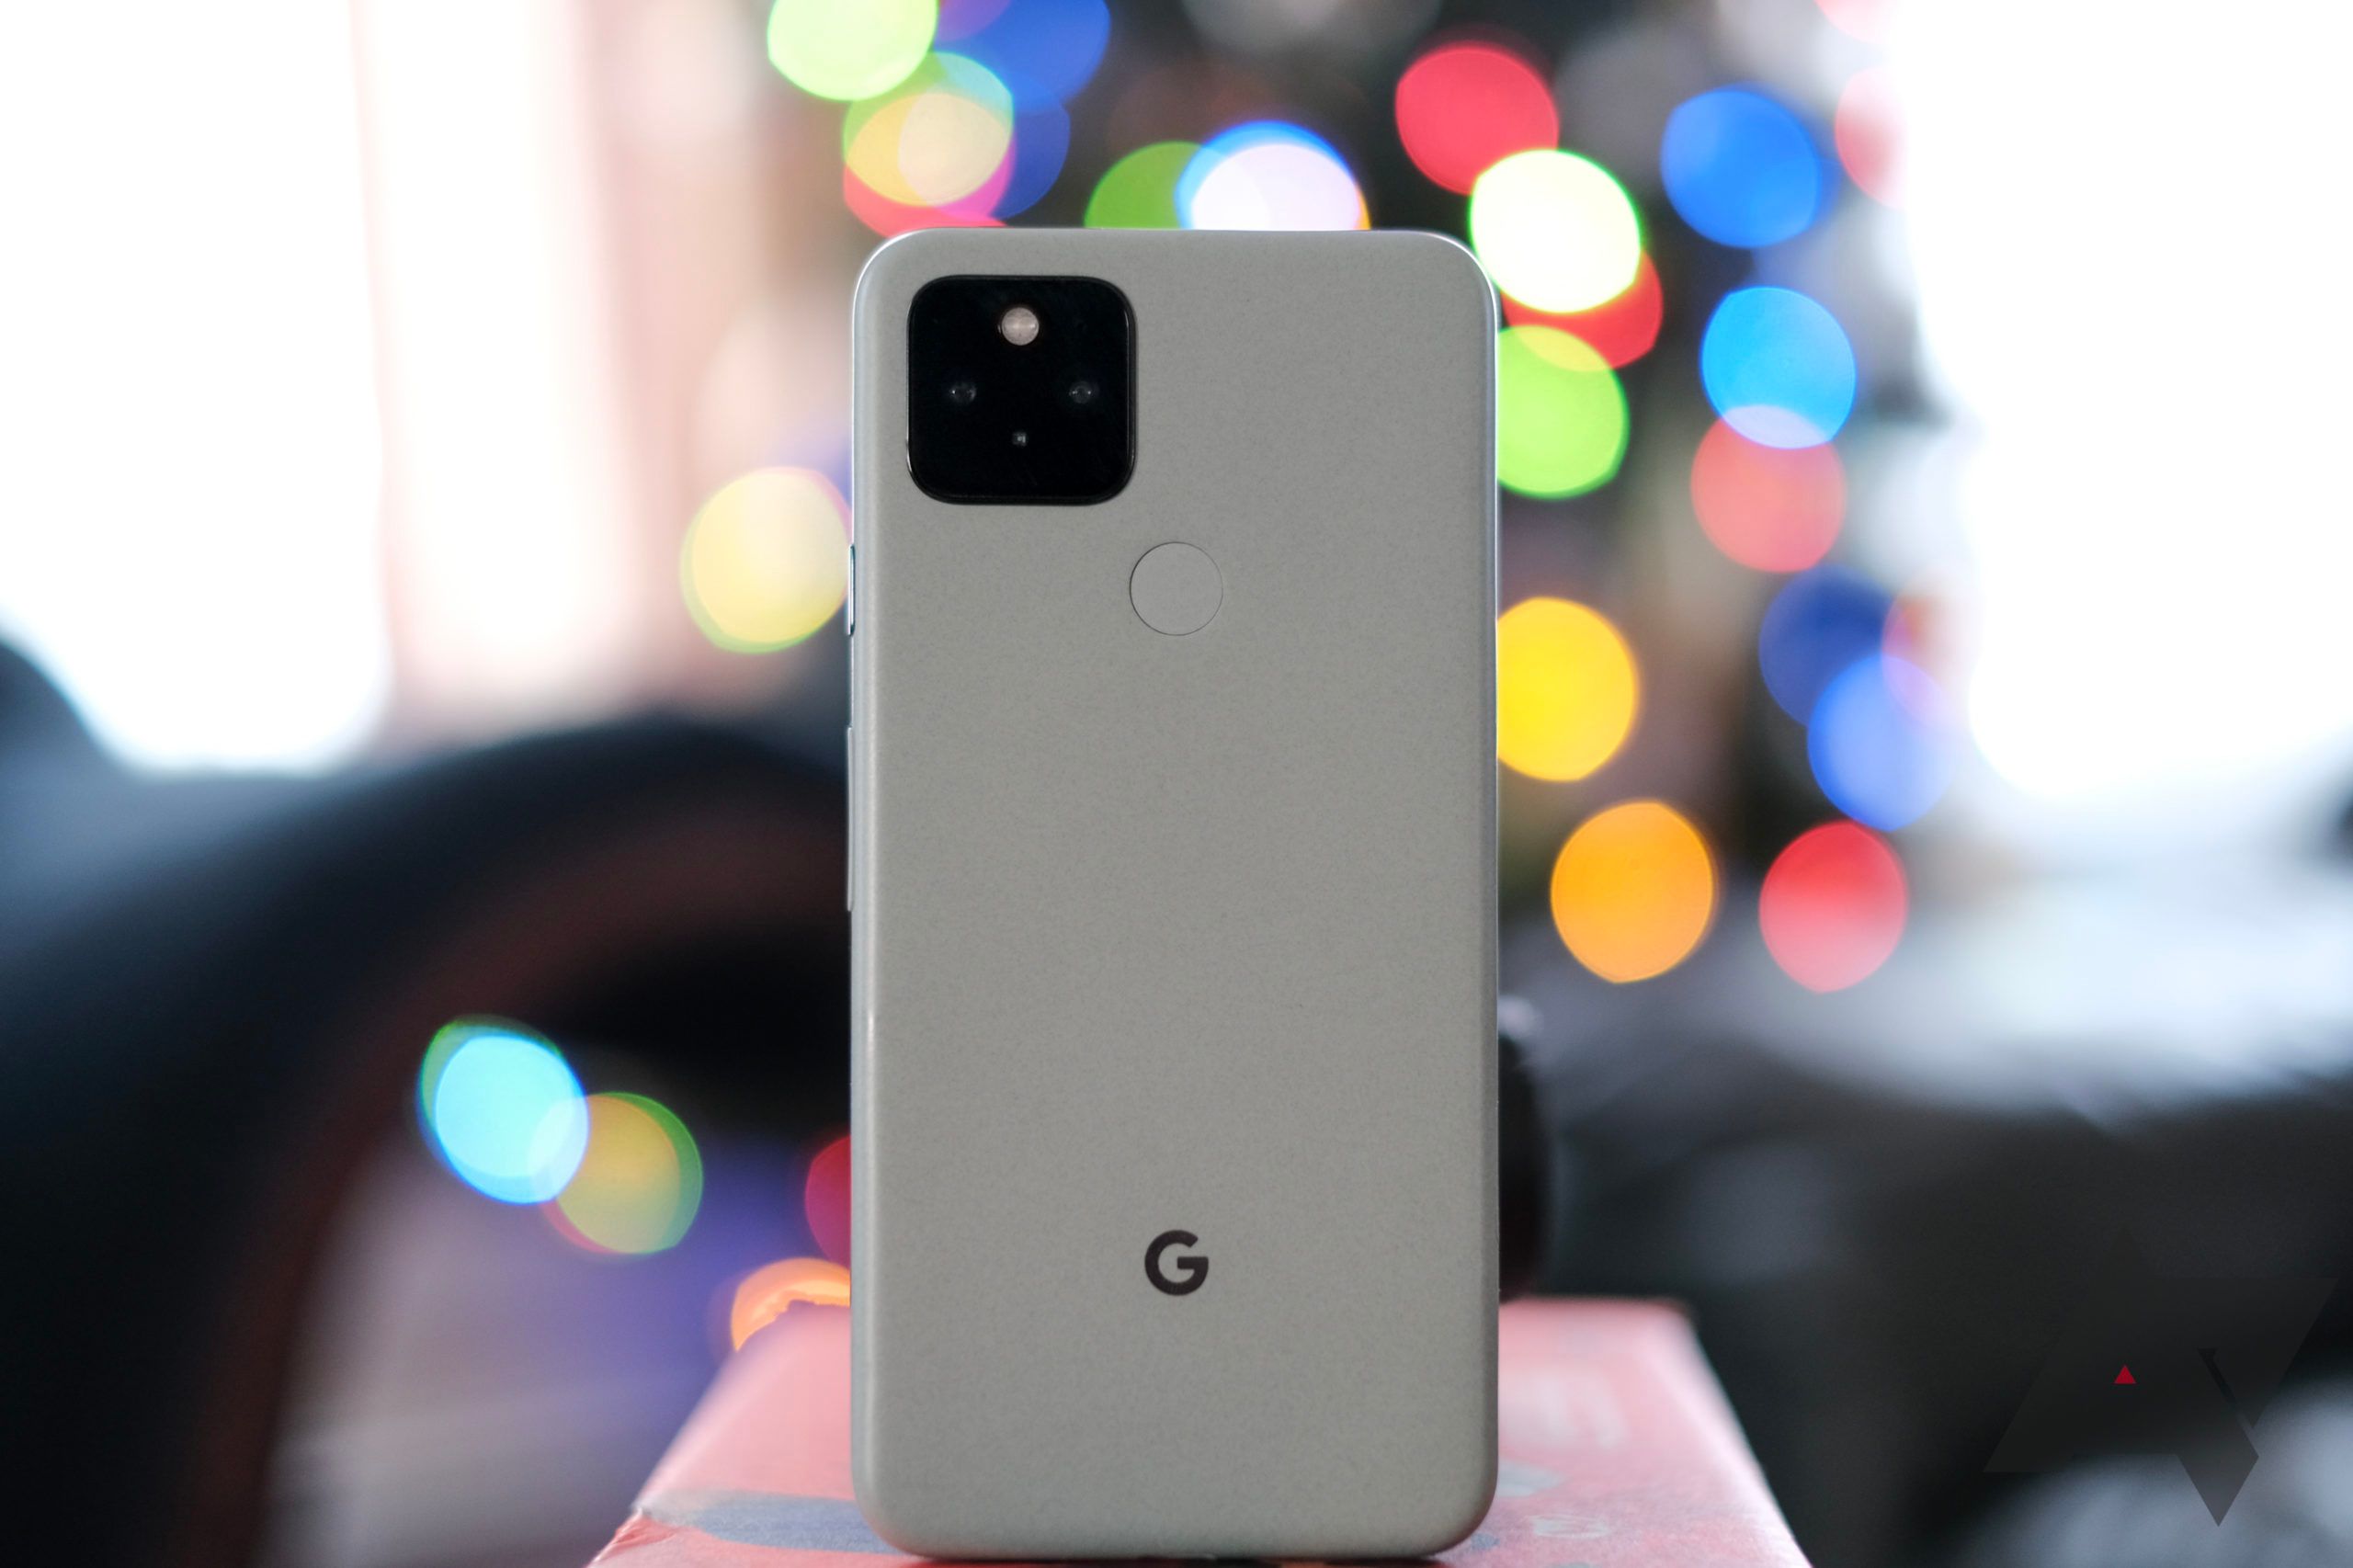 Exciting News: A Wild Pixel 5 and Pixel 4a (5G) Update Surfaces